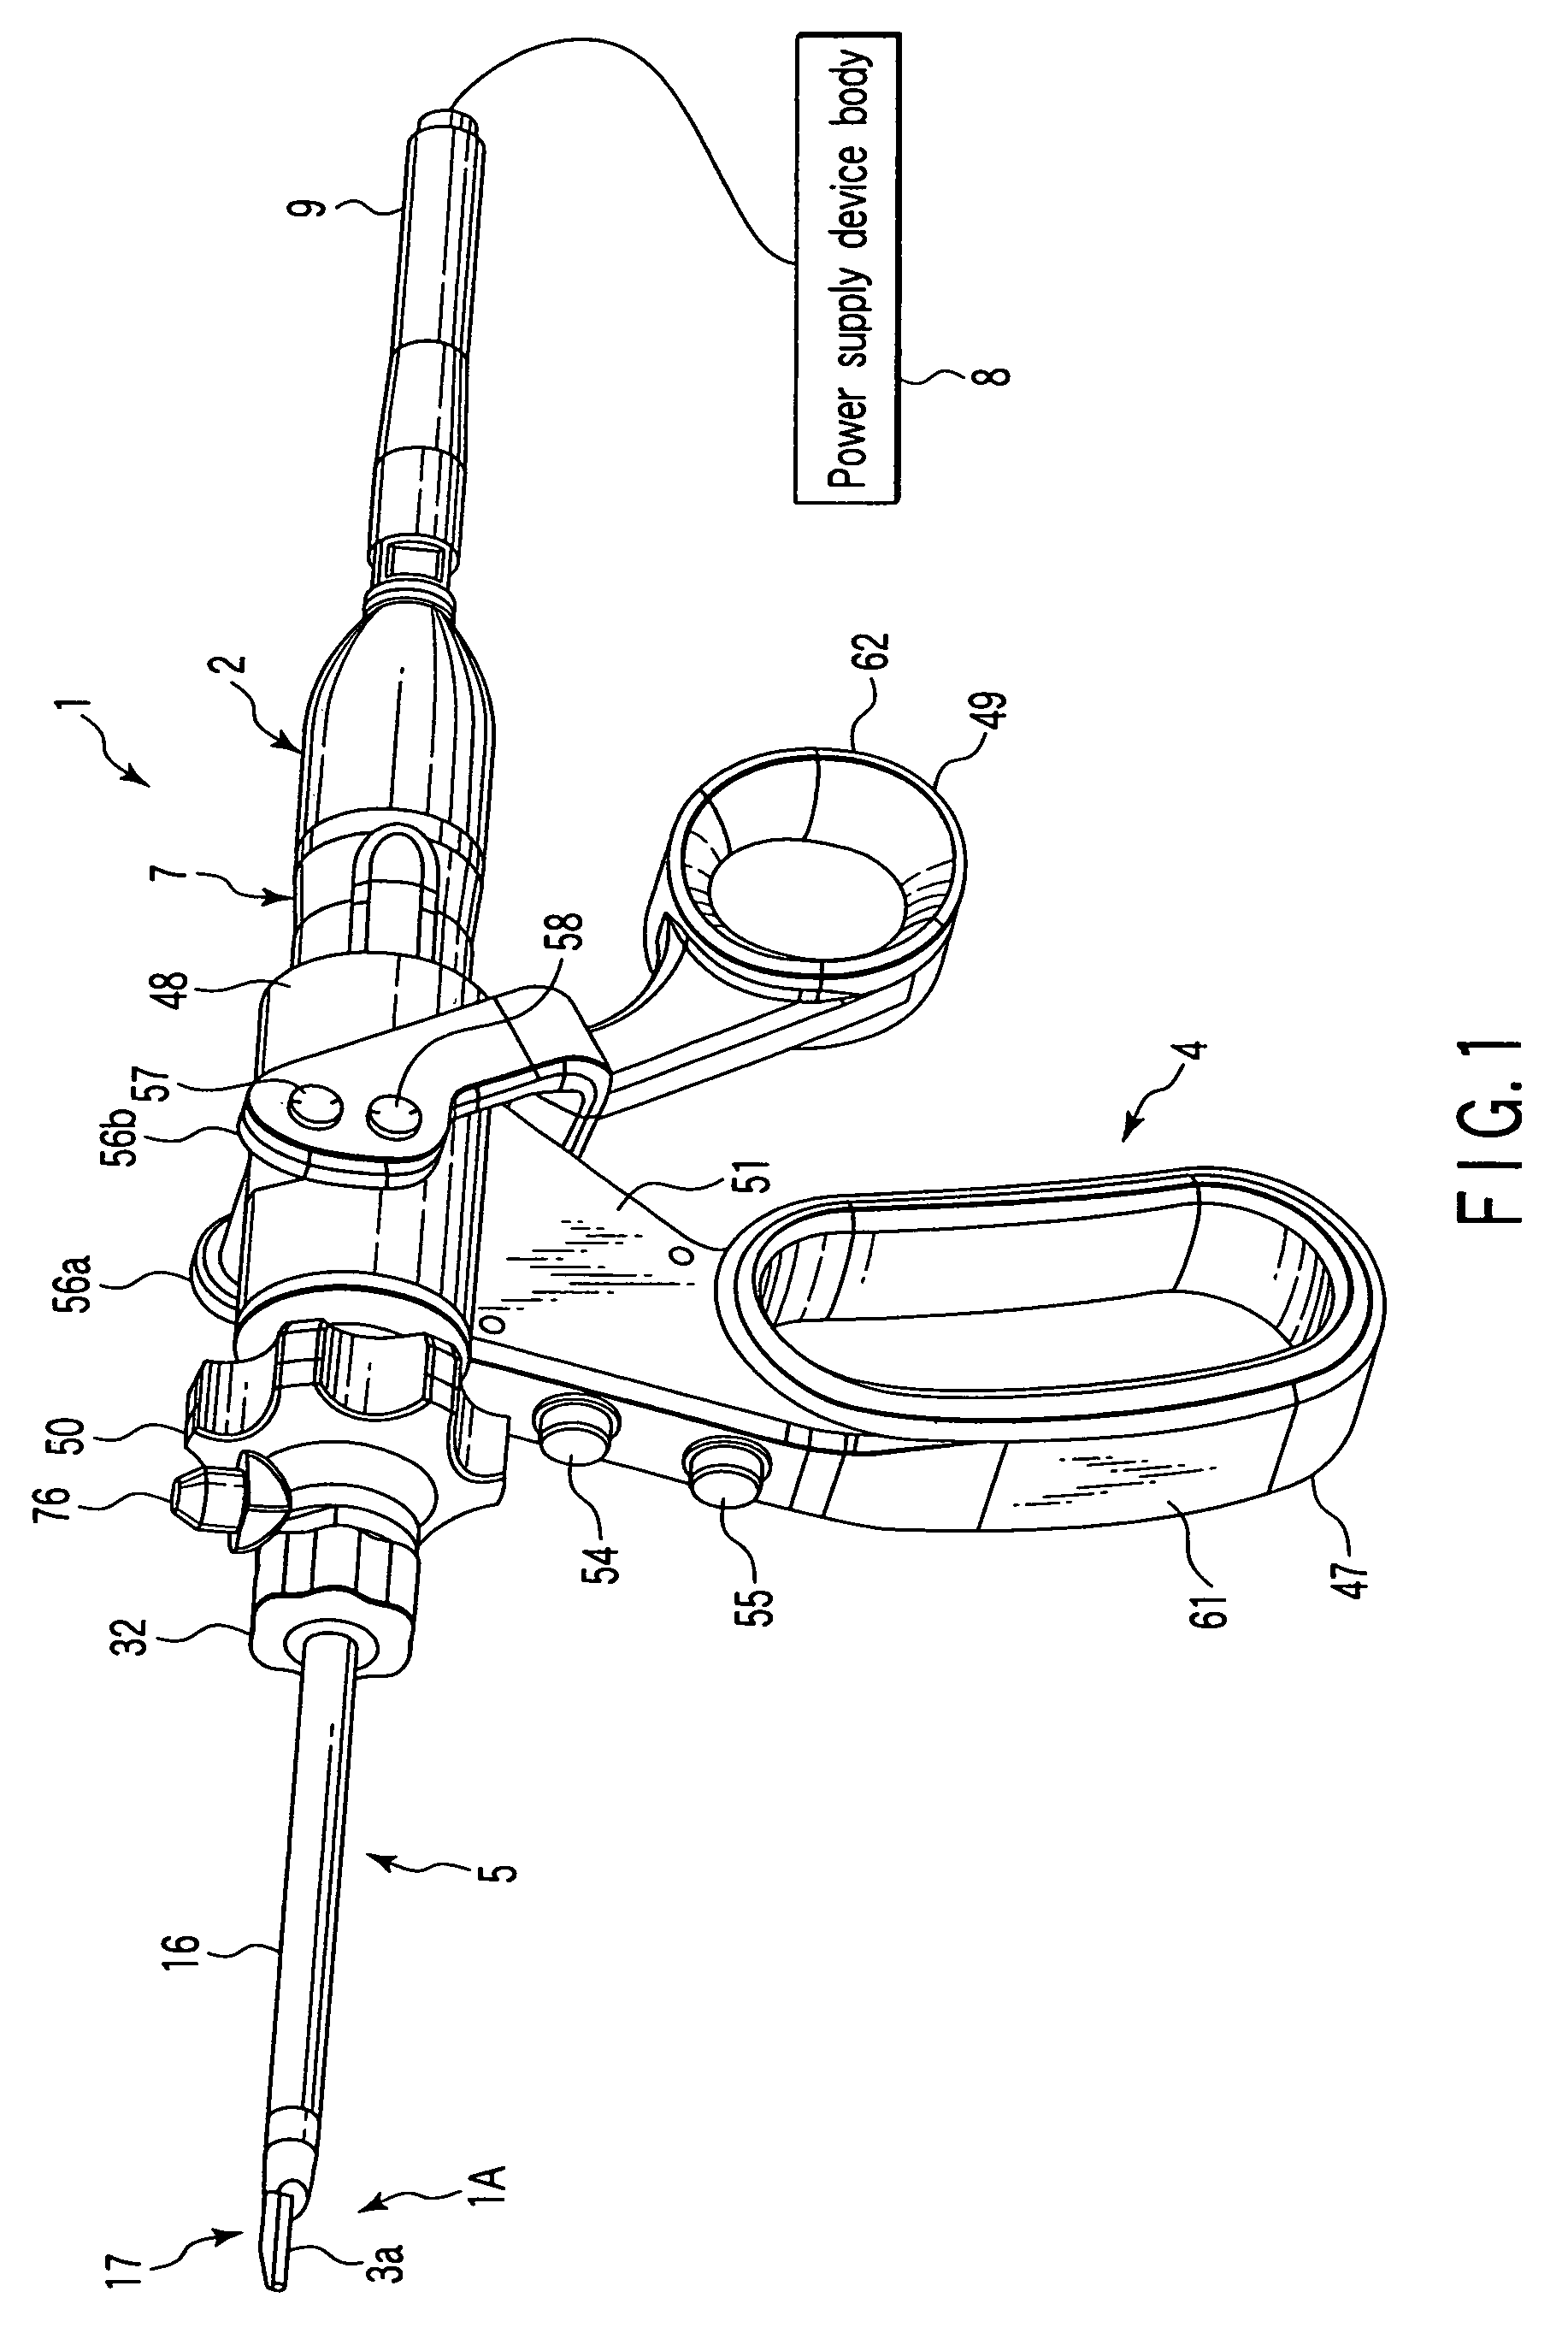 Surgical operating apparatus